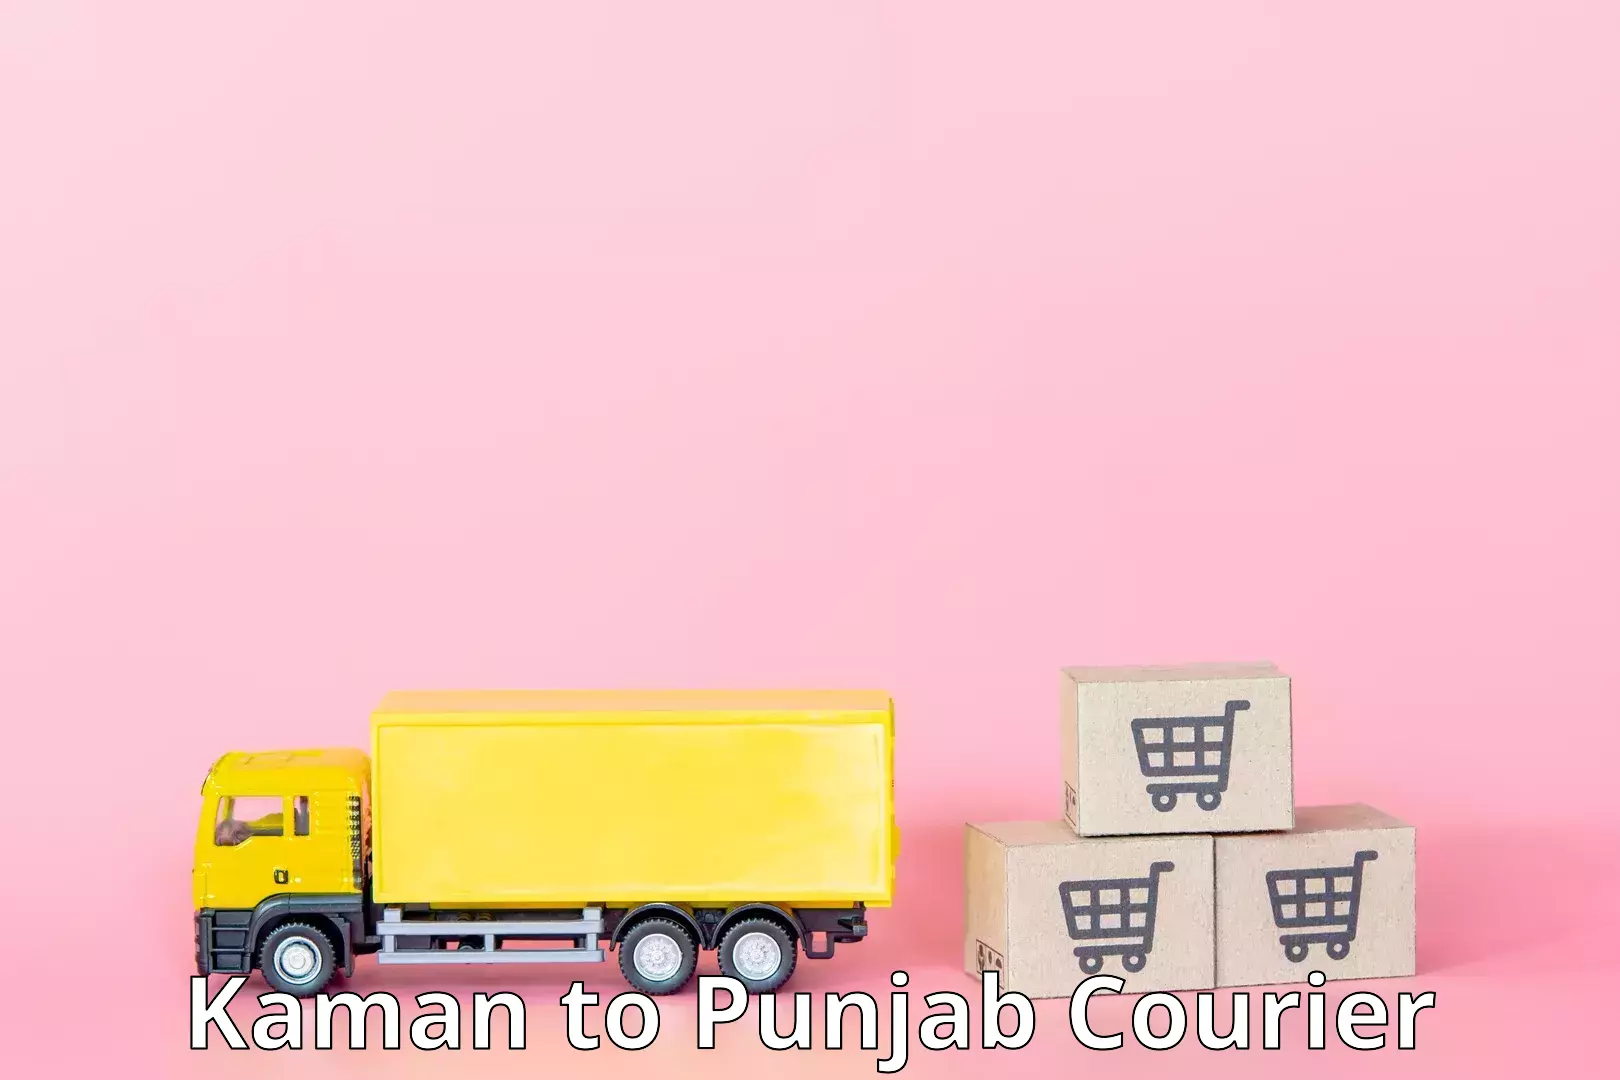 Express delivery network Kaman to Gurdaspur